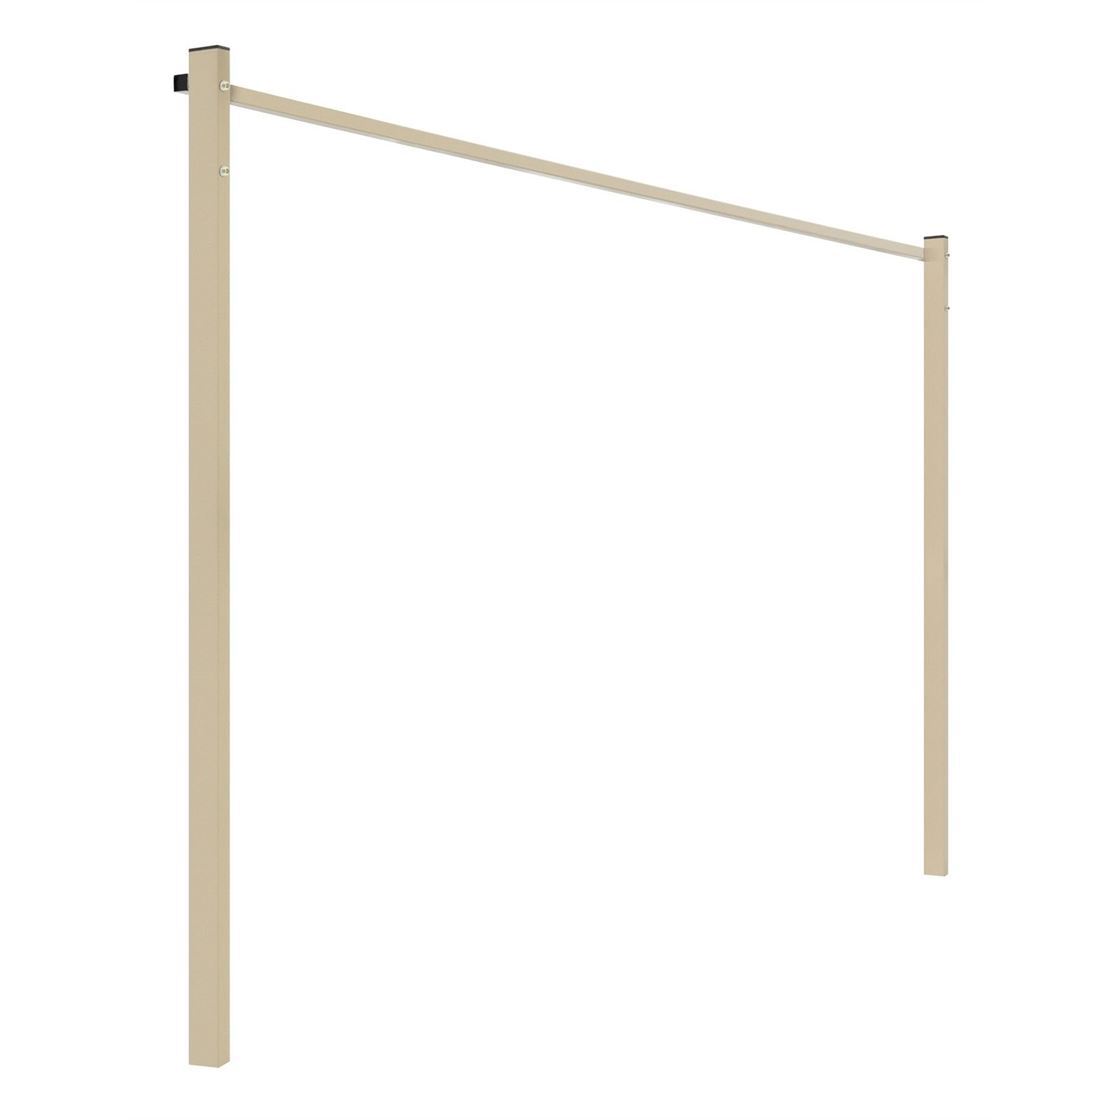 Austral Ground Mount Kit 2.4m for Fold Down Clotheslines  [Colour: Dune]